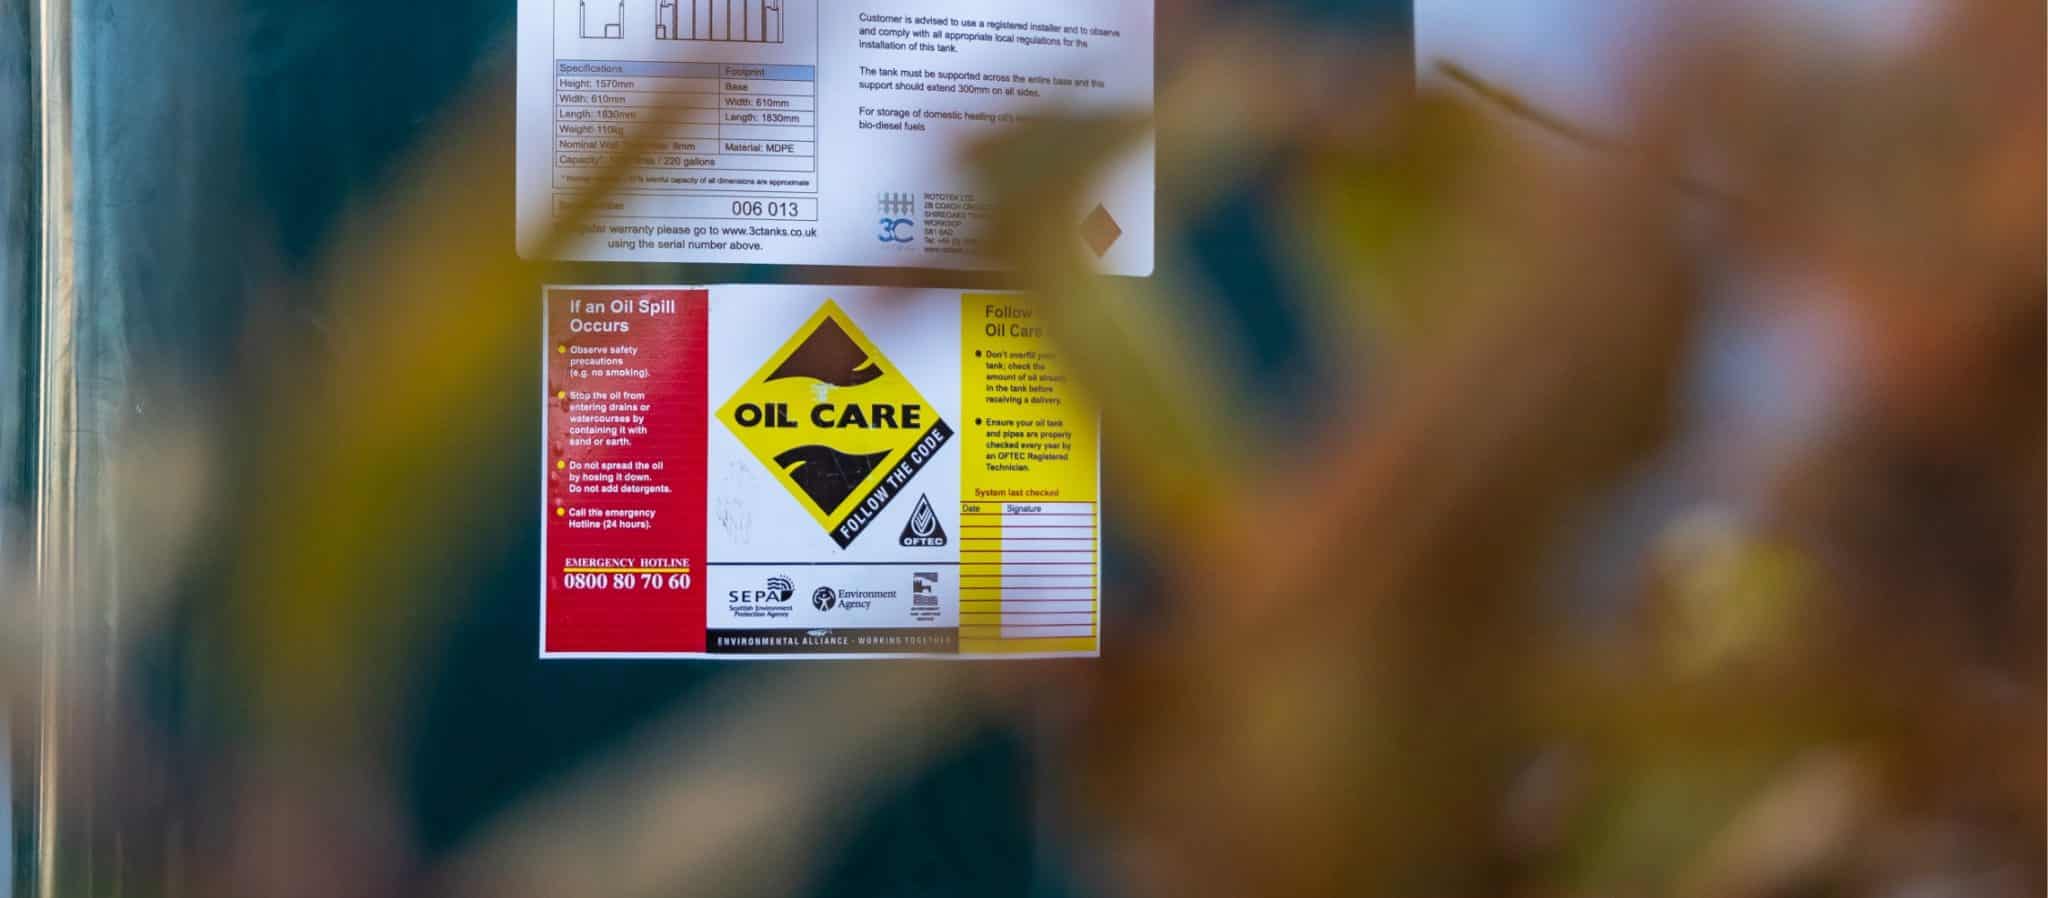 oil tank fire and safety regulation stickers